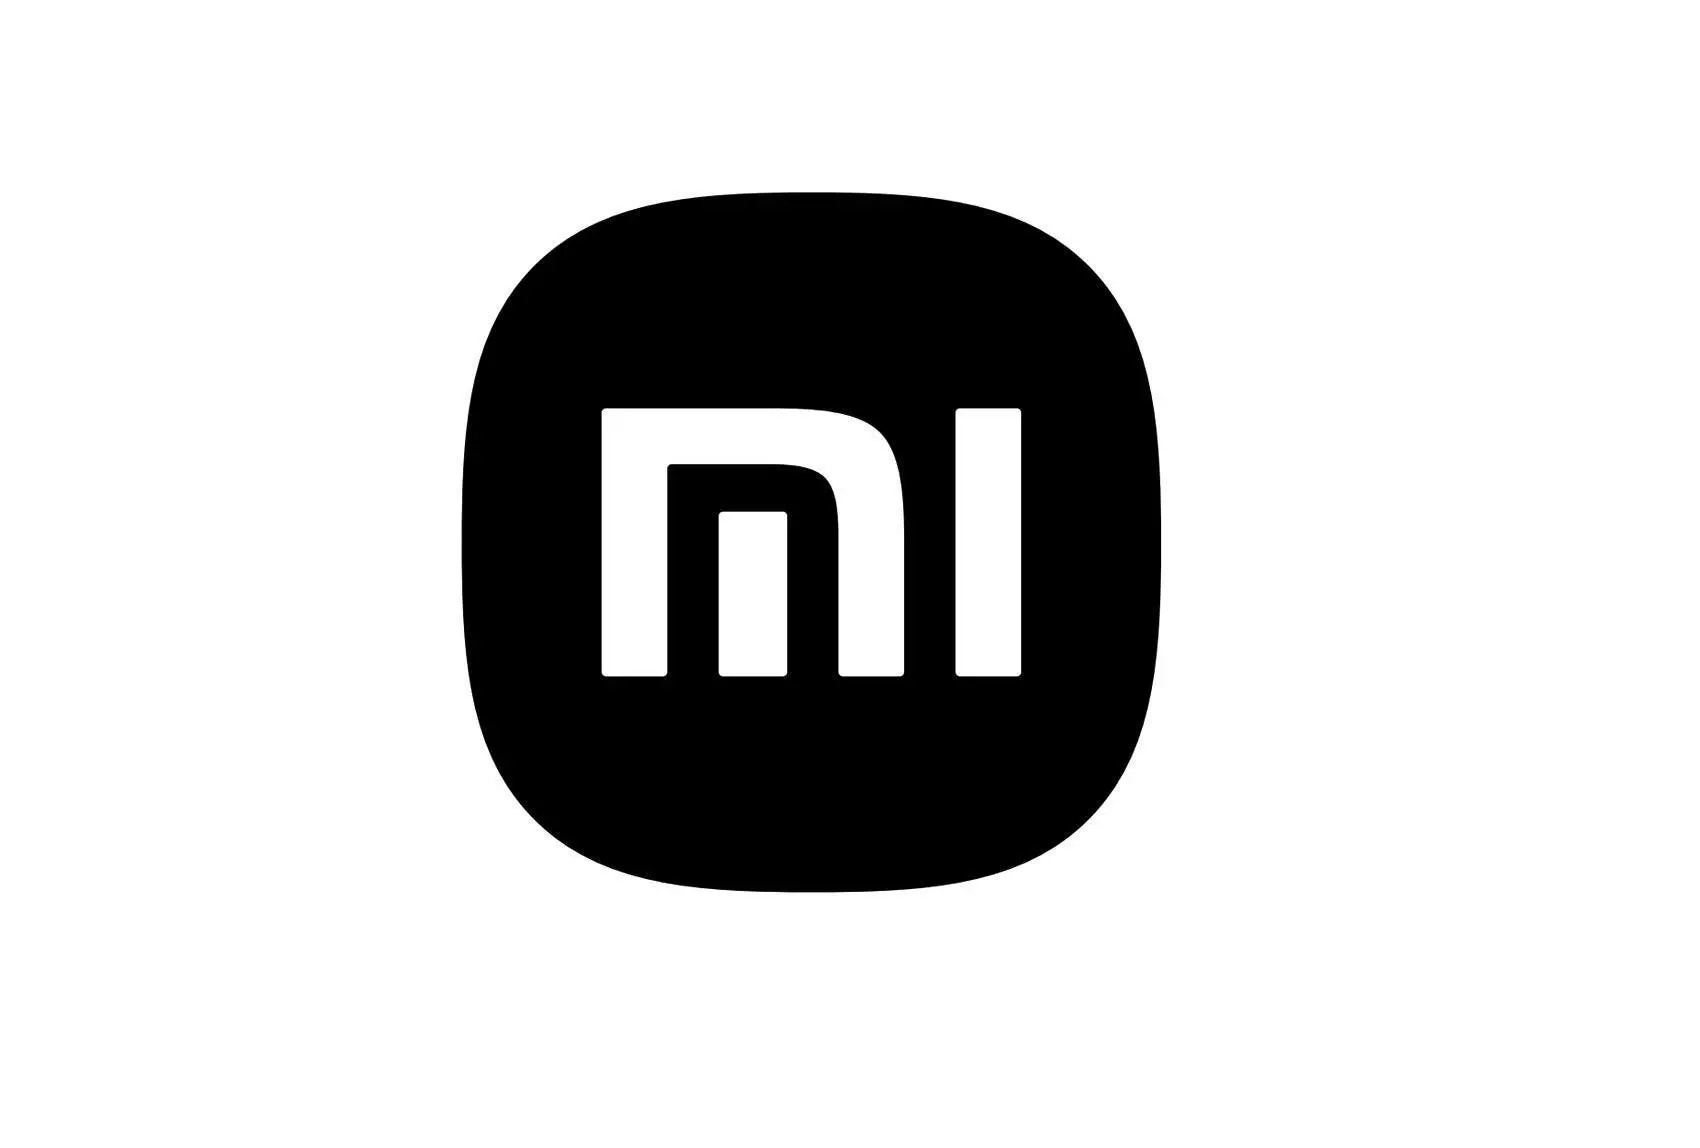 Is that also worth $300,000? Xiaomi has patented a new logo in black and white colors